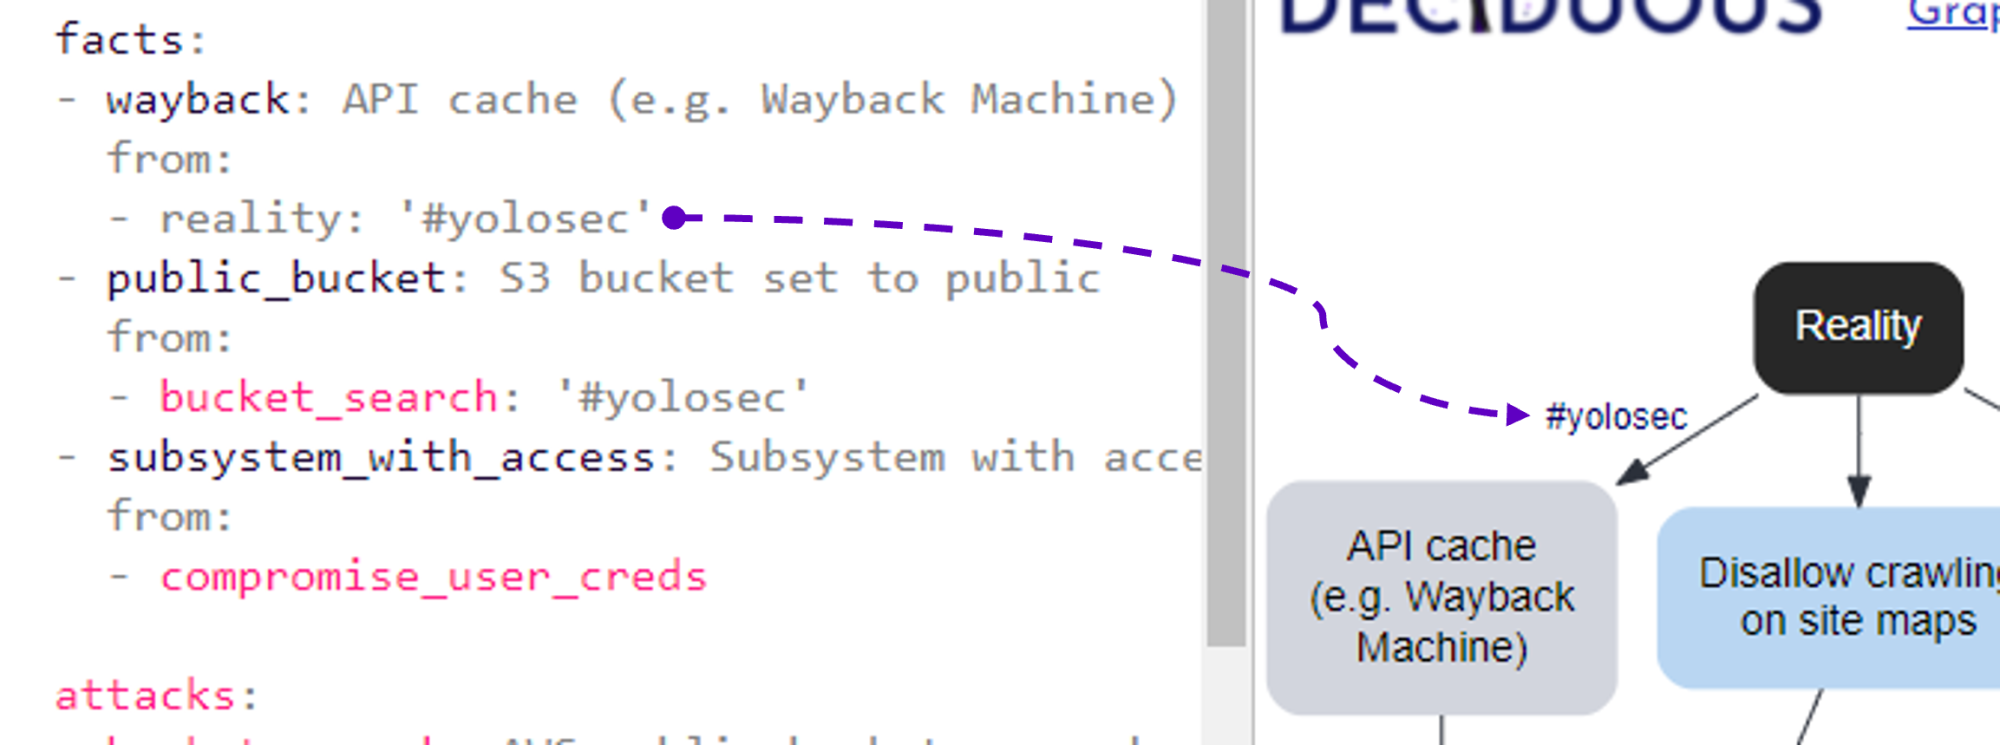 A screenshot showing how typing a “#yolosec” label manifests in the graph. The label #yolosec appears next to the arrow pointing from the “Reality” node to the “API cache Wayback Machine” node.